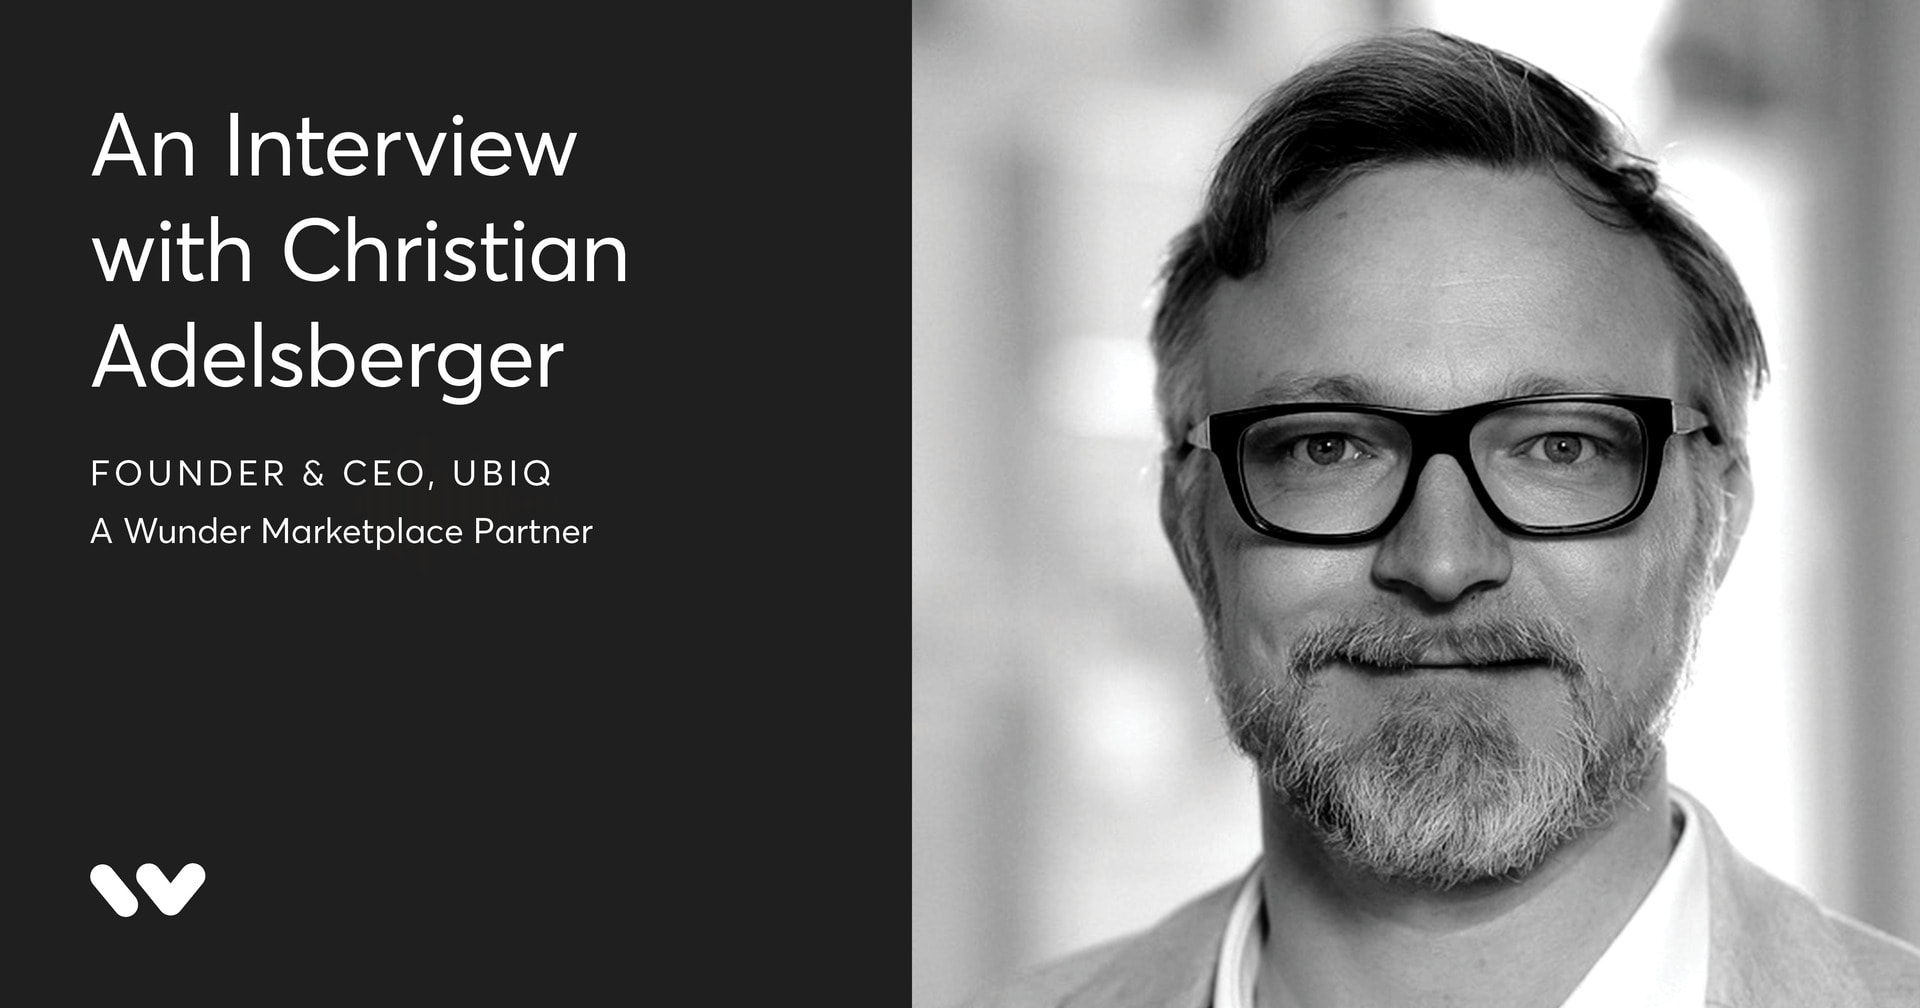 Template titled "An Interview with Christian Adelsberger founder & CEO, Ubiq, A Wunder Marketplace Partner".